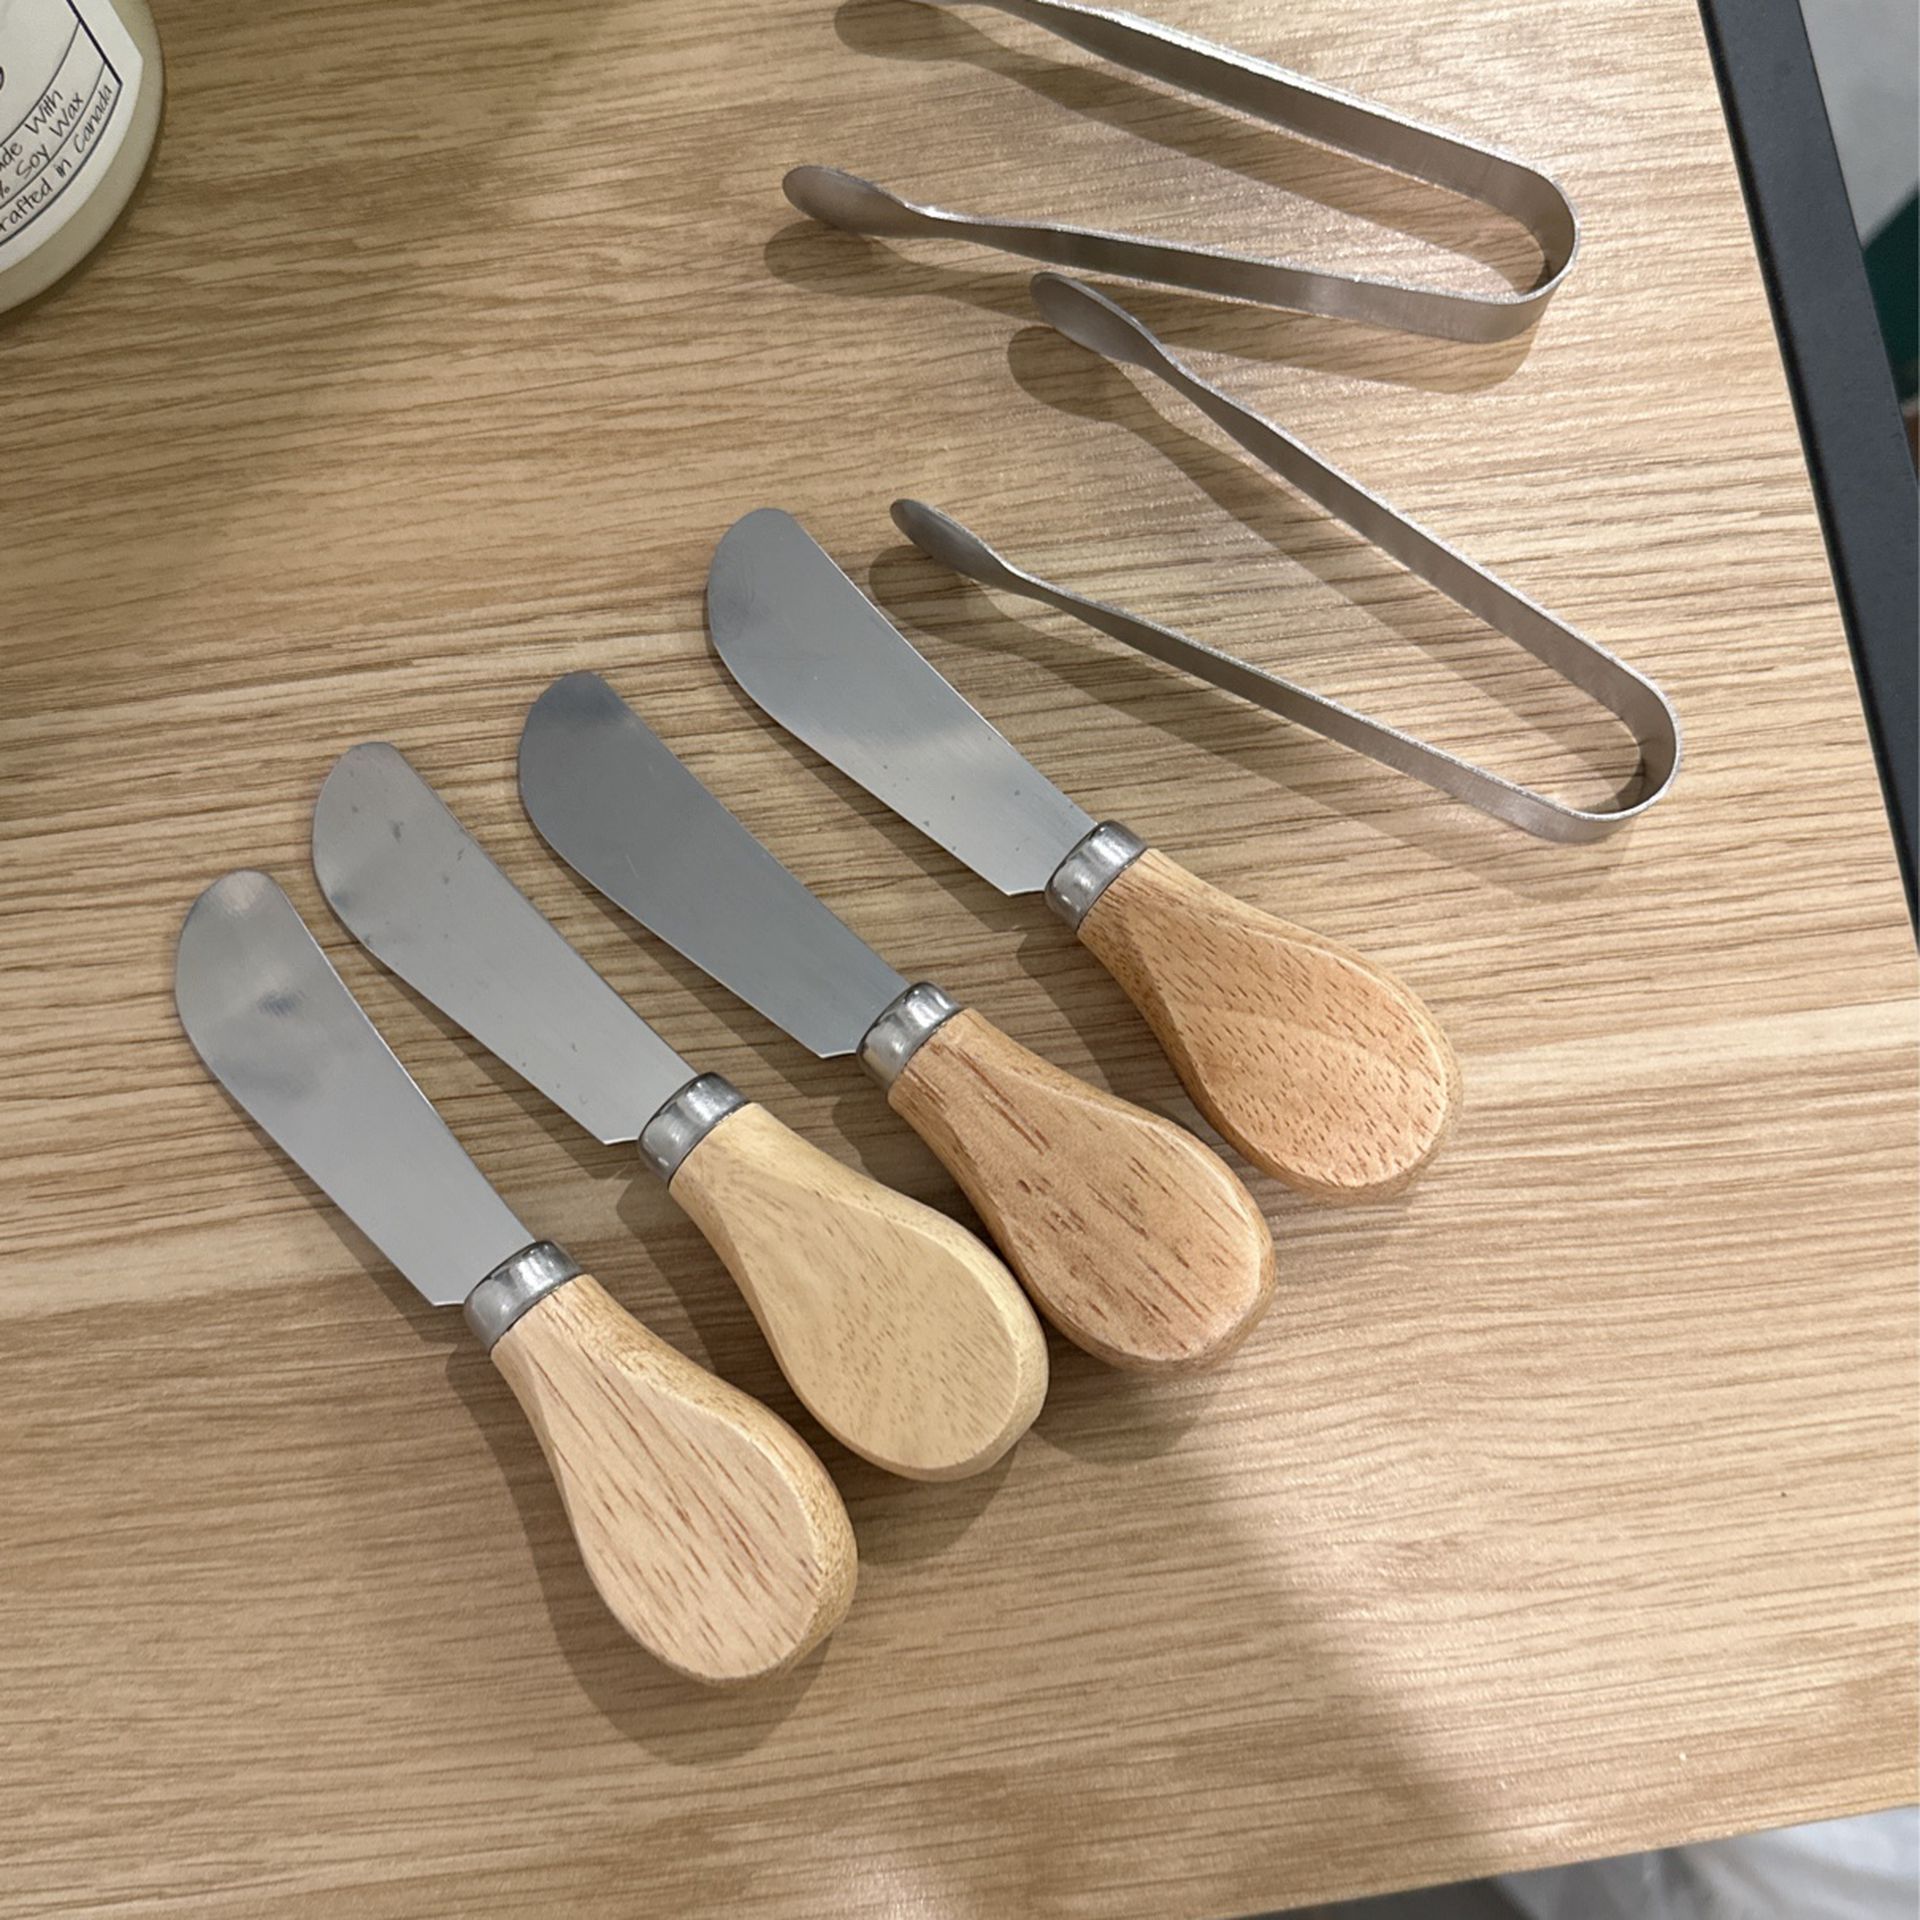 Free With Any Purchase: Cheese Knives And Mini Tongs Charcuterie Set